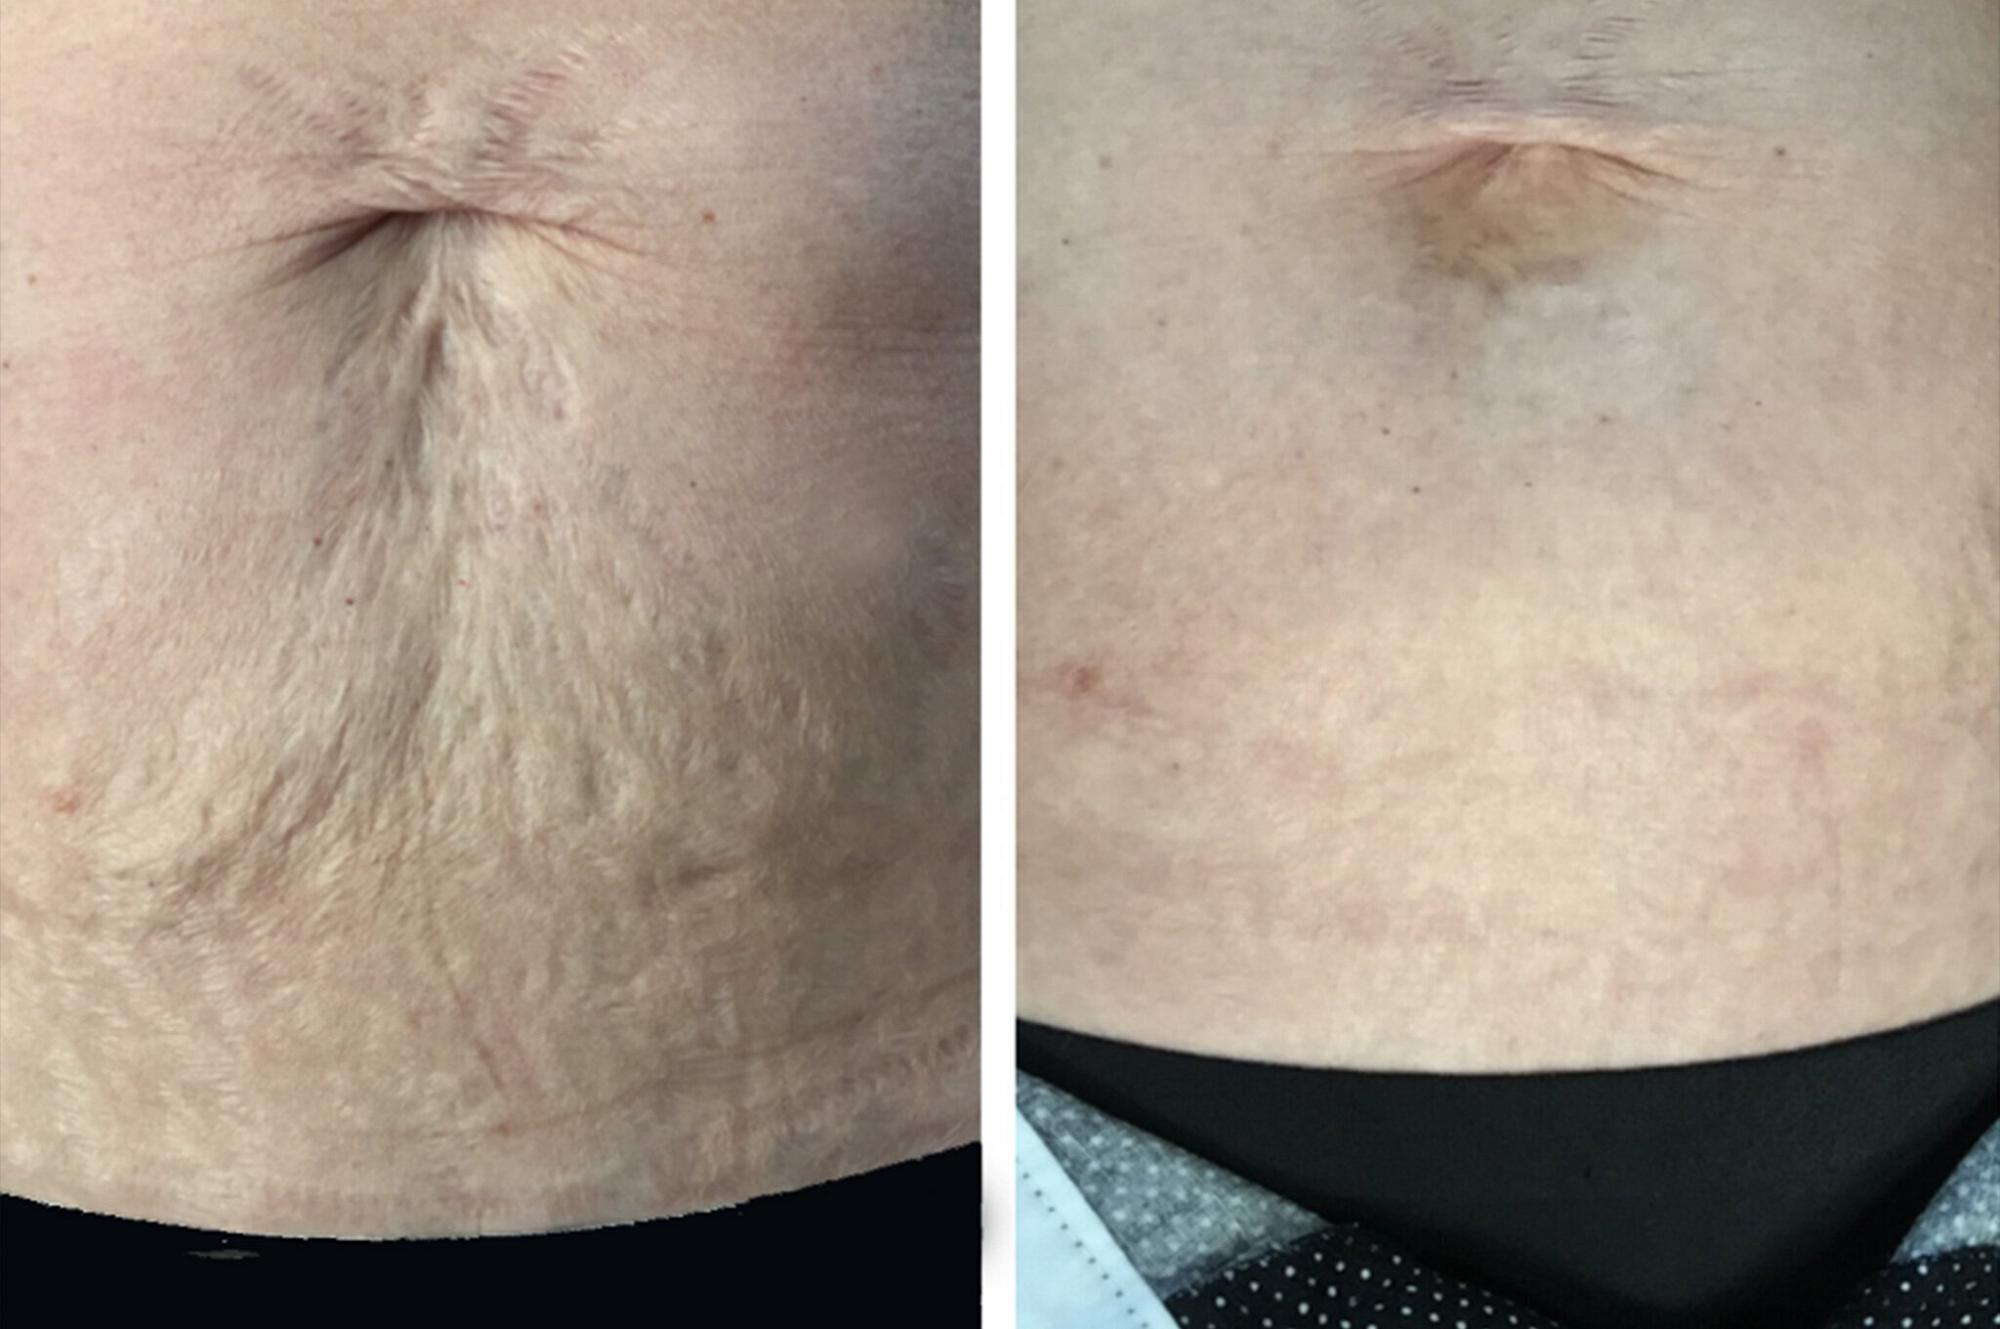 Fractional laser resurfacing patient before and after treatment